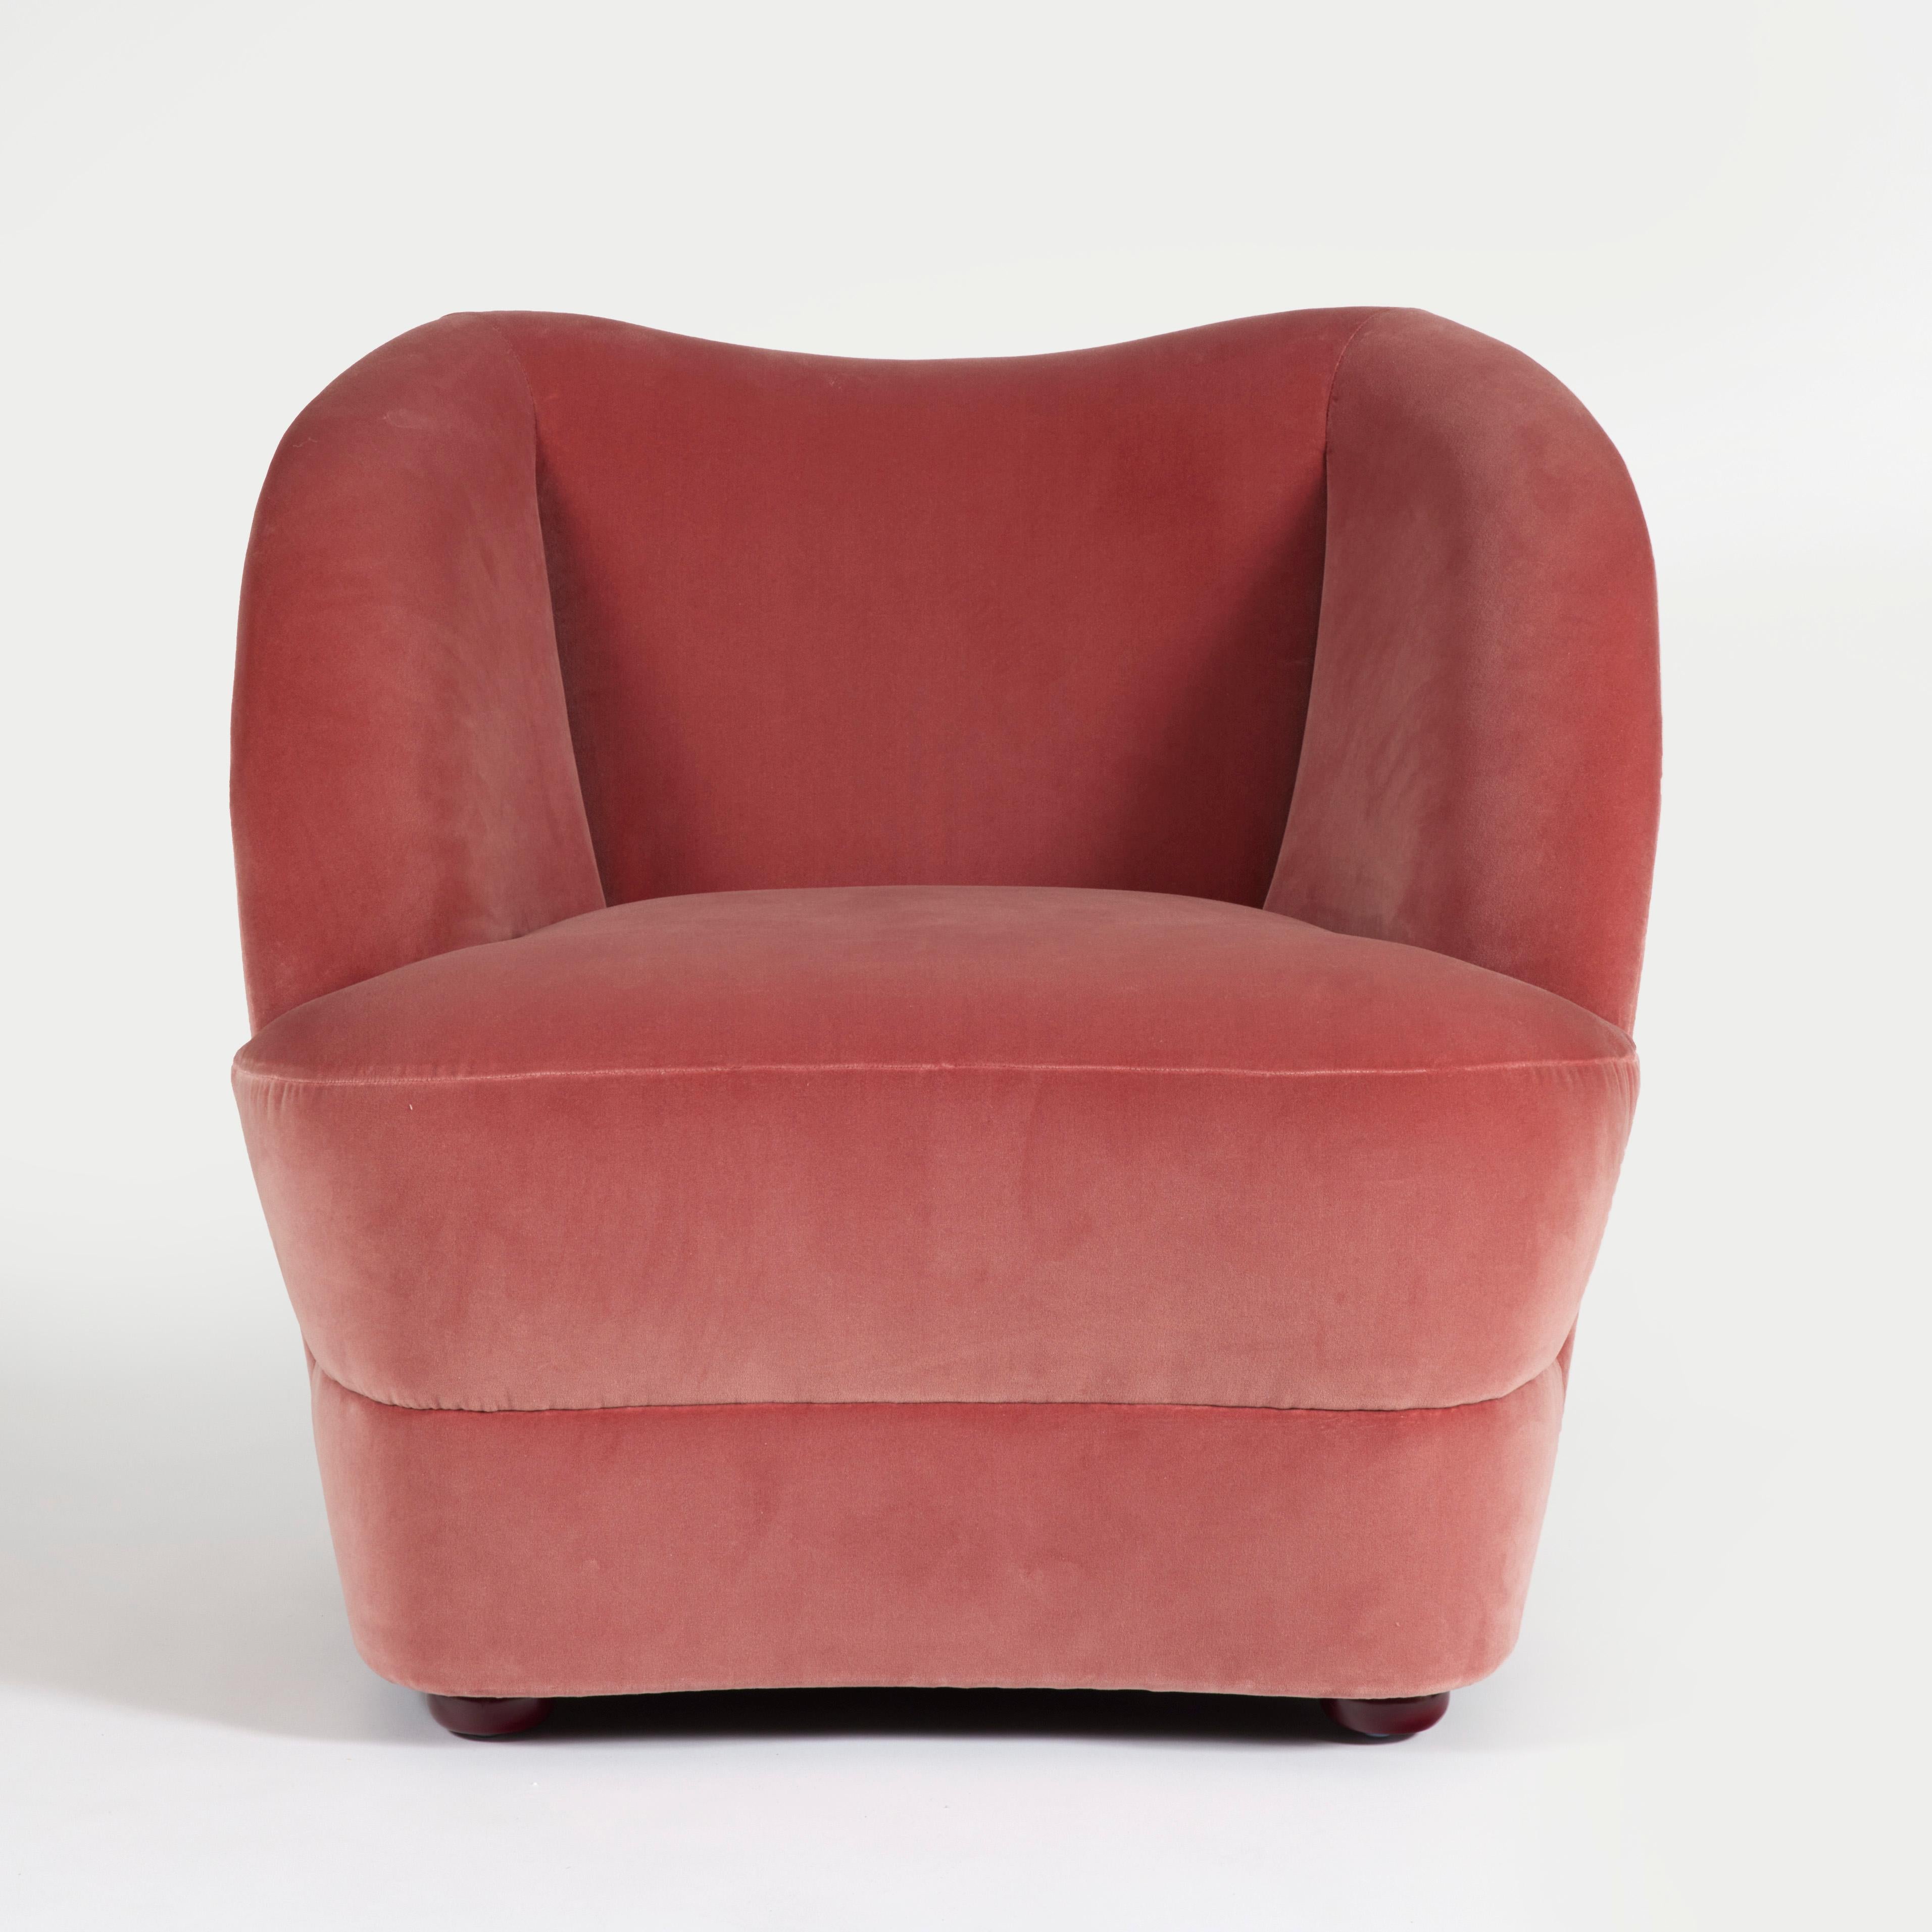 All over upholstered armchair in velvet with lacquered wooden feet.
Made in France.
  